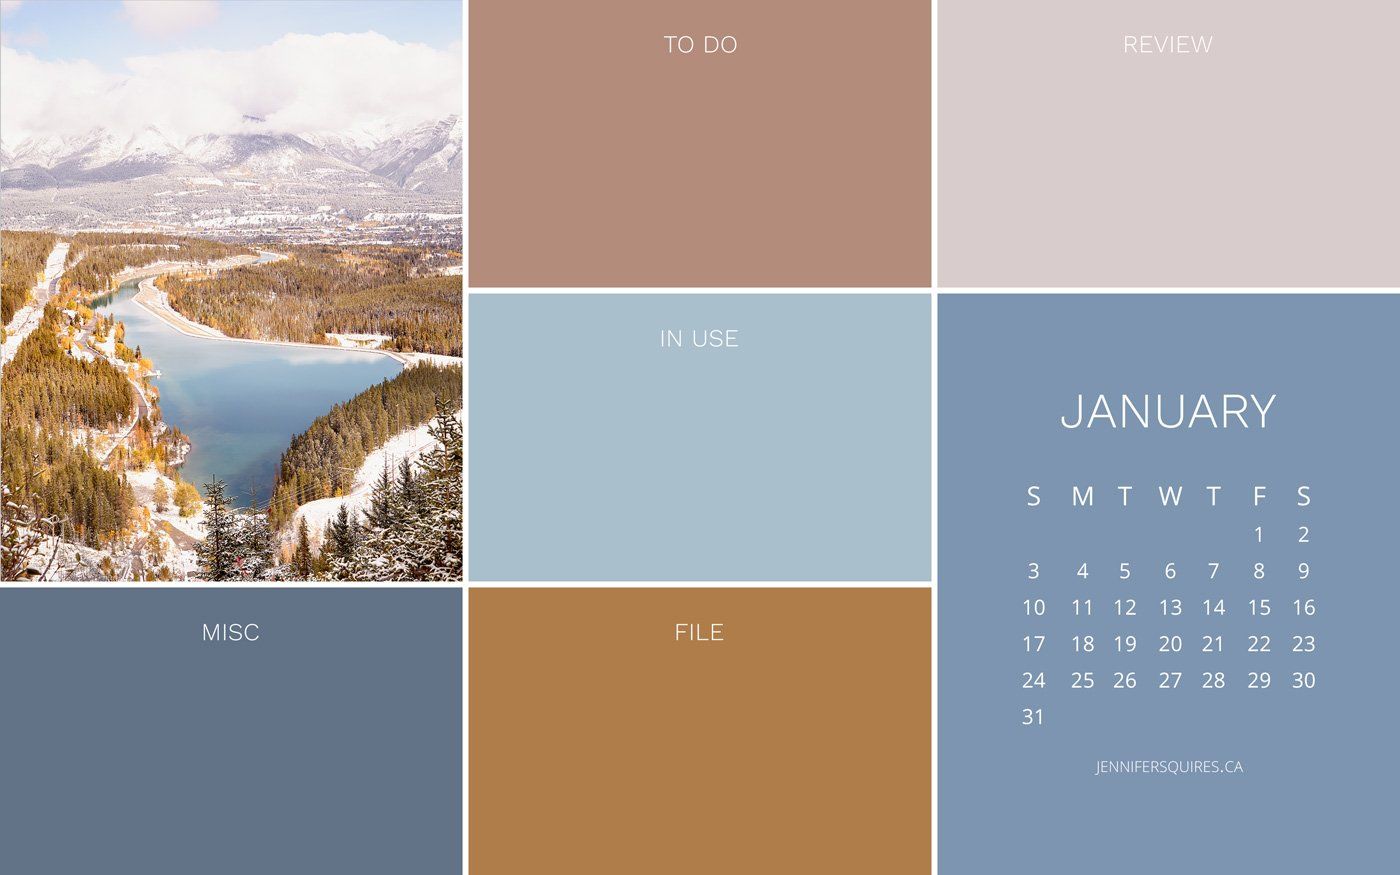 January 2021 Wallpaper with Calendar for iPhone and Desktop